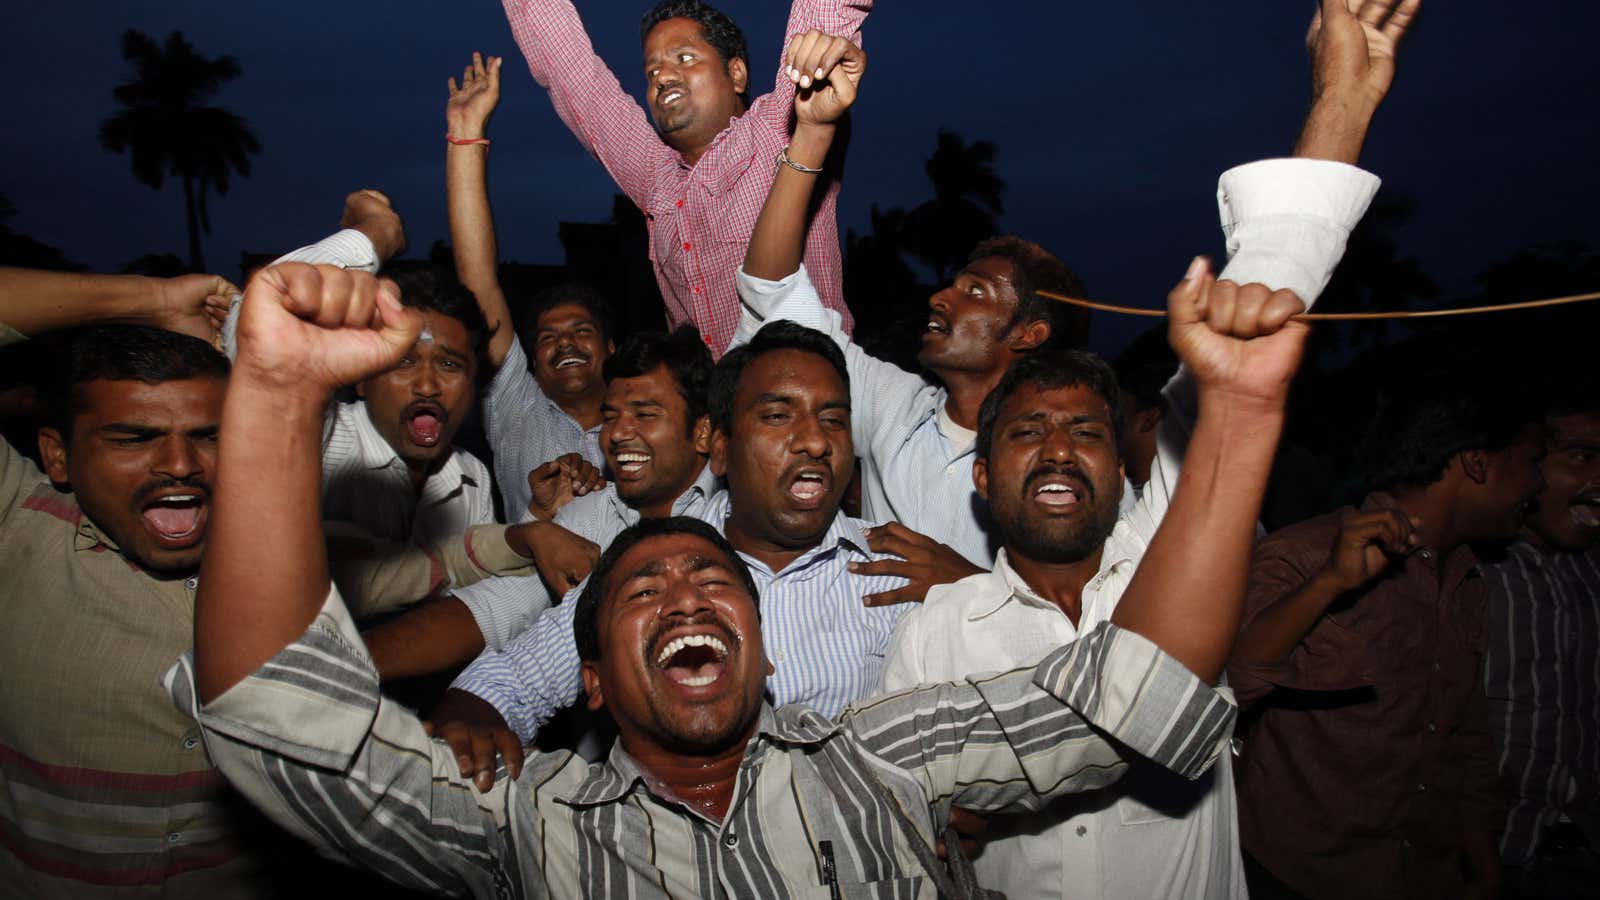 Students of Osmania University celebrate after India’s ruling coalition endorsed the creation of the new state.